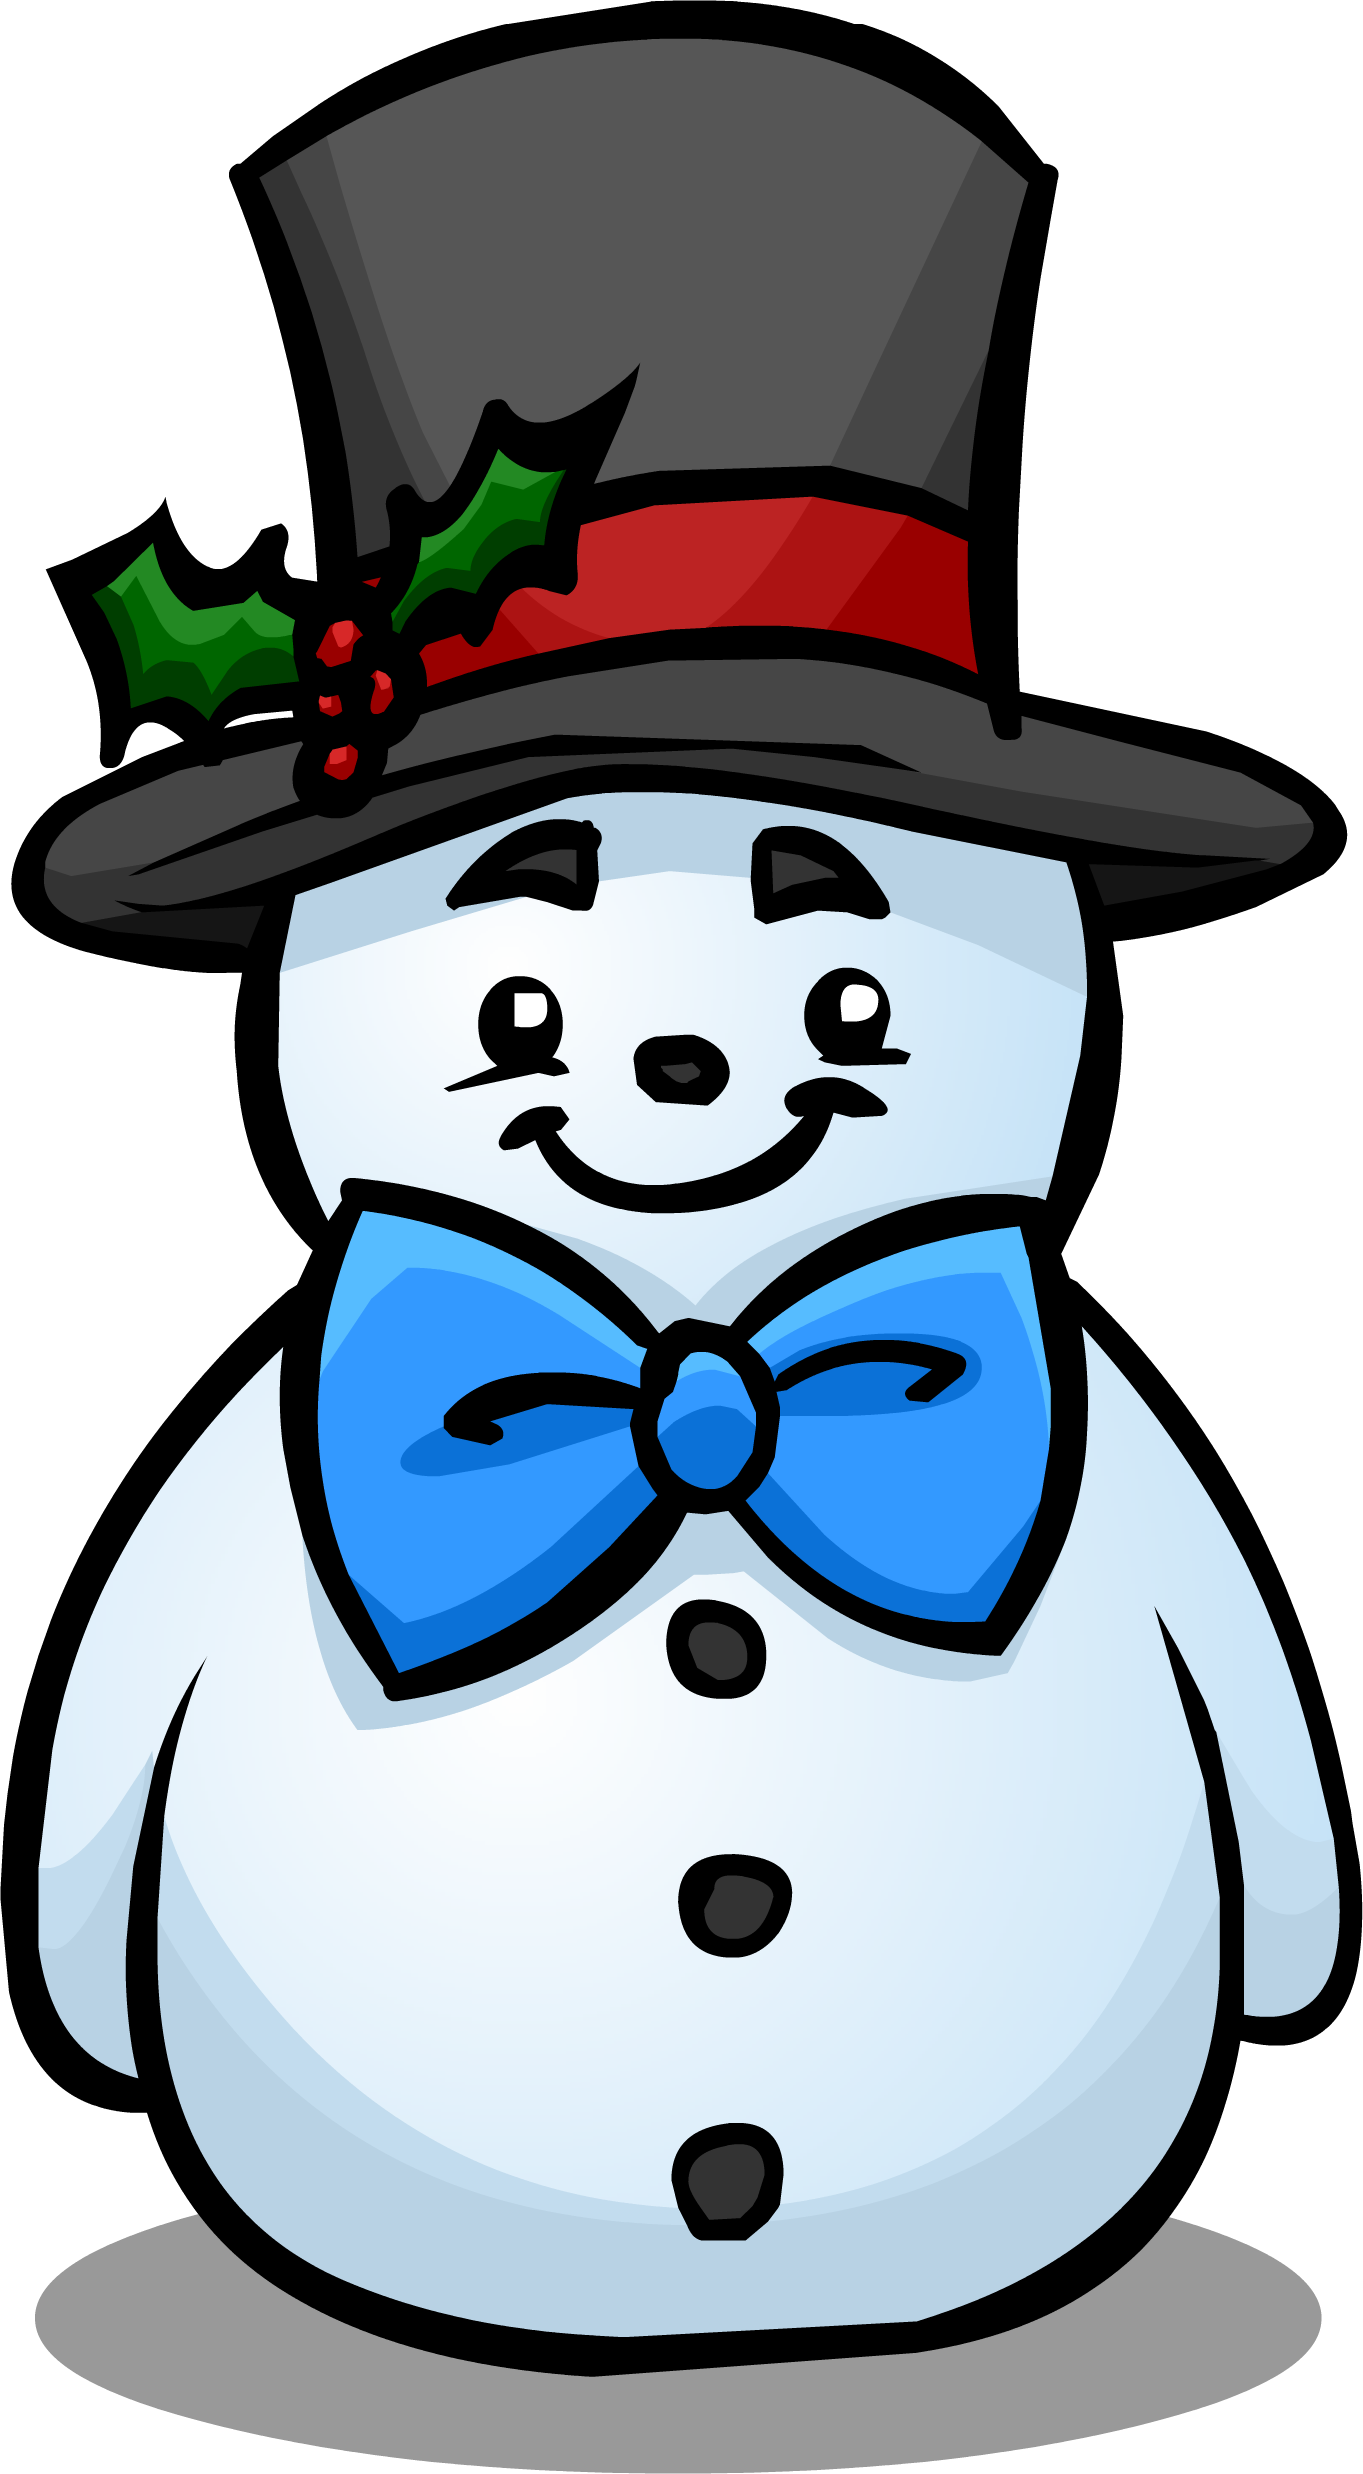 Snowman With Top Hat (1363x2474)